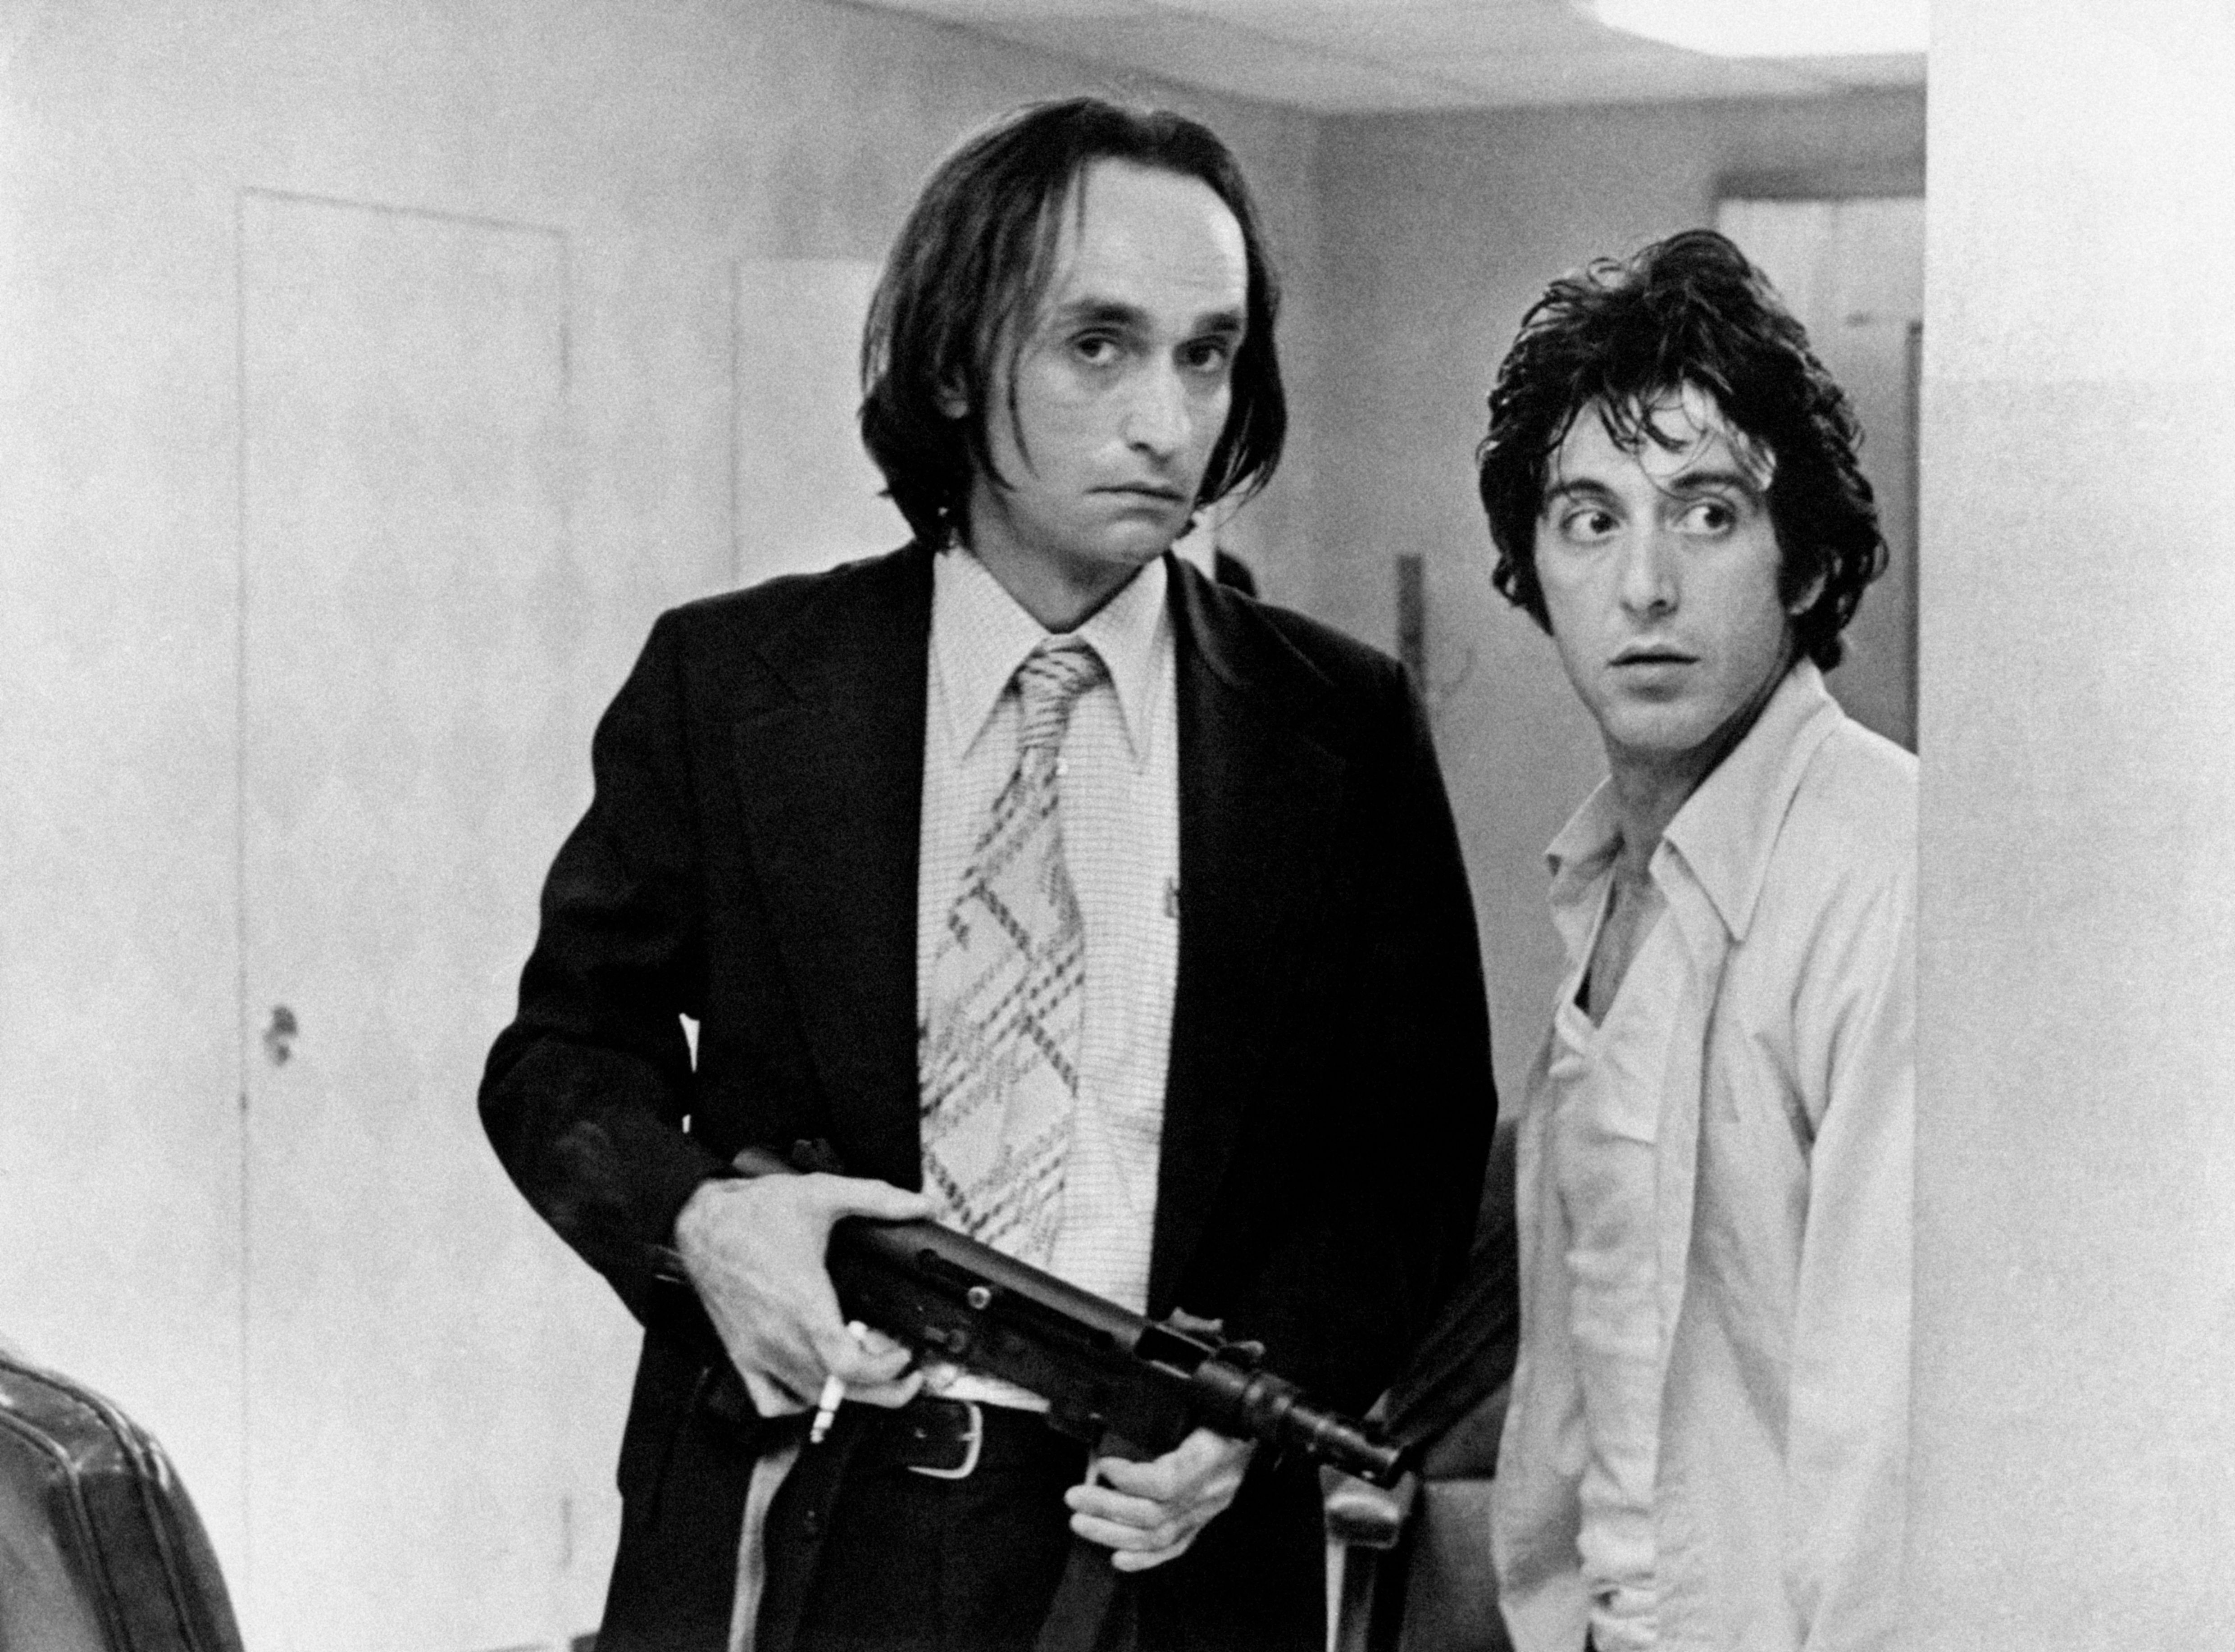 John Cazale with Al Pacino on the set of the 1975 film "Dog Day Afternoon" | Source: Getty Images